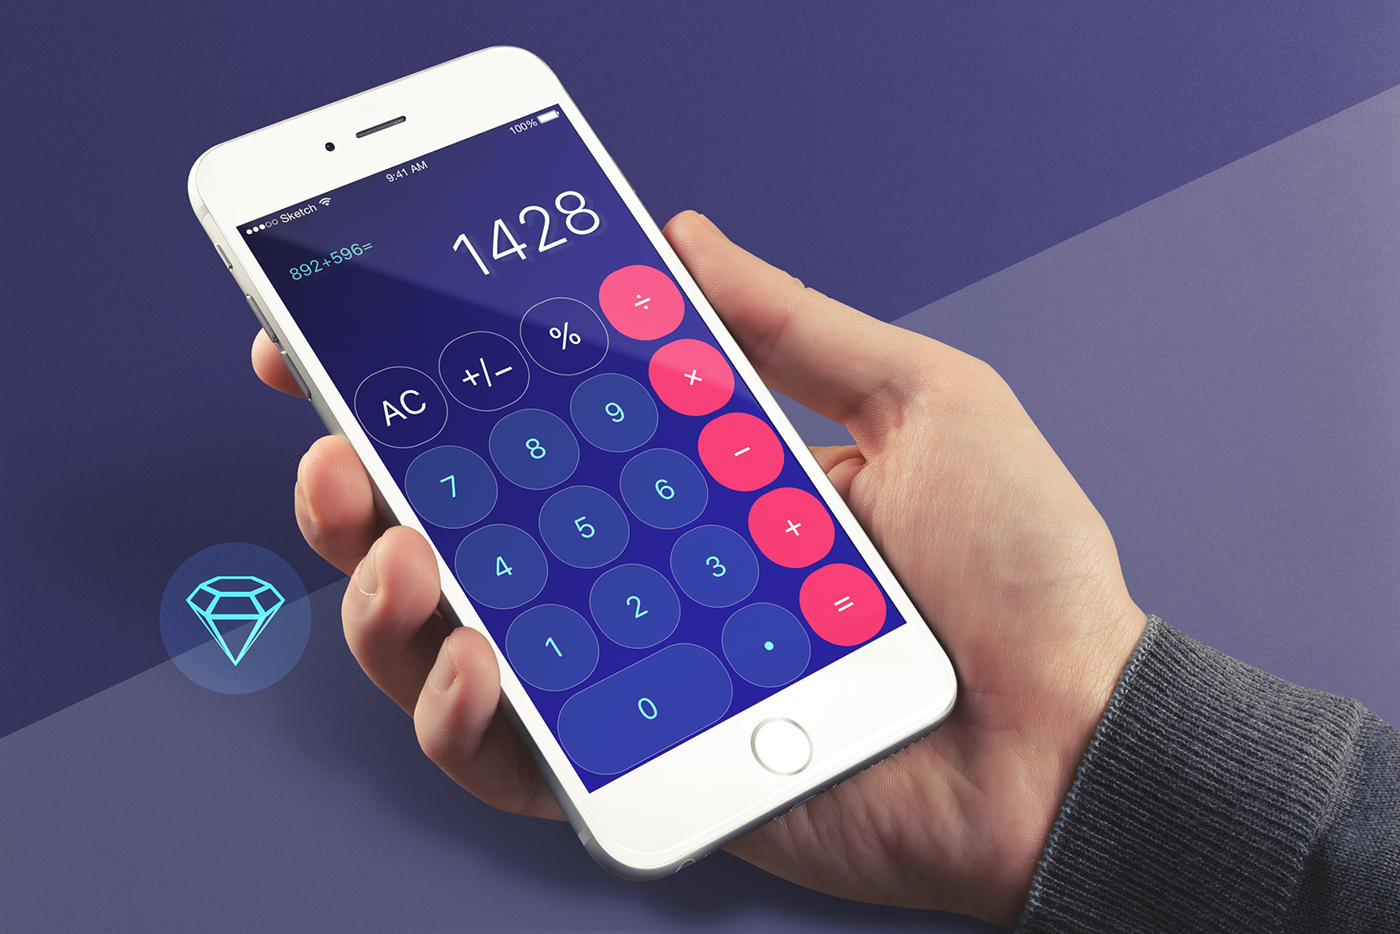 Day19 day100 calculator app daily ui sketchapp free UI ux ui design sketch Sources download fxoffice